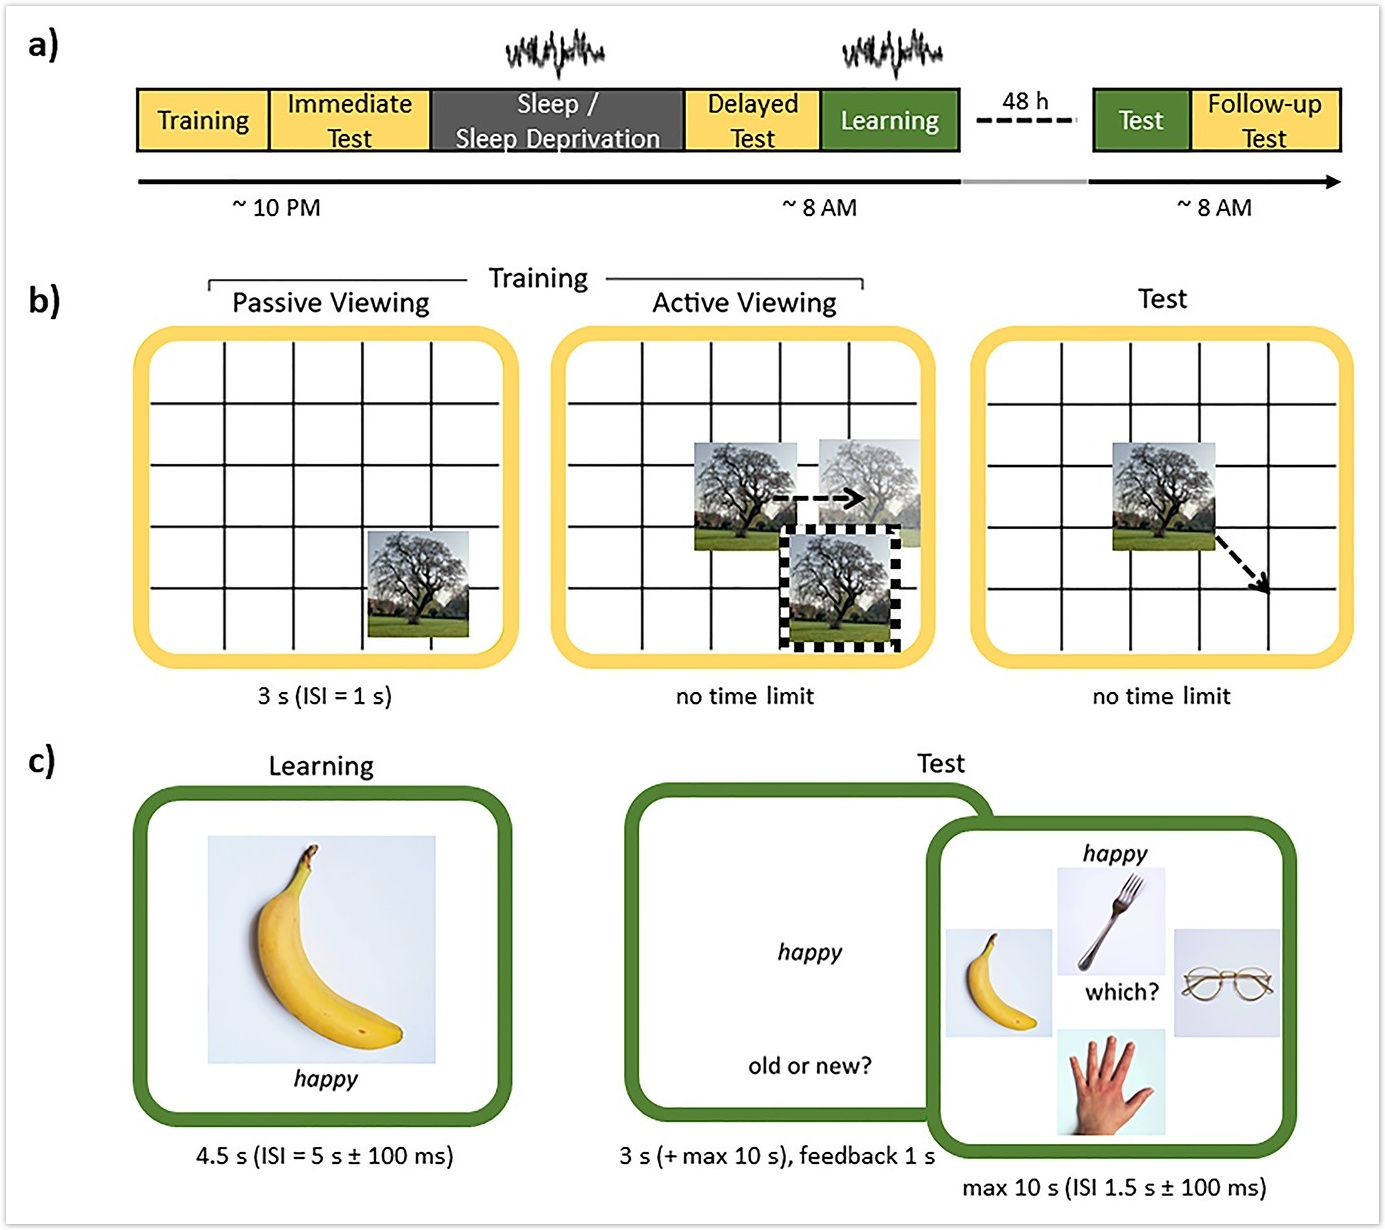 An image from the article 'Sleep loss disrupts the neural signature of successful learning' showing experimental procedures and tasks